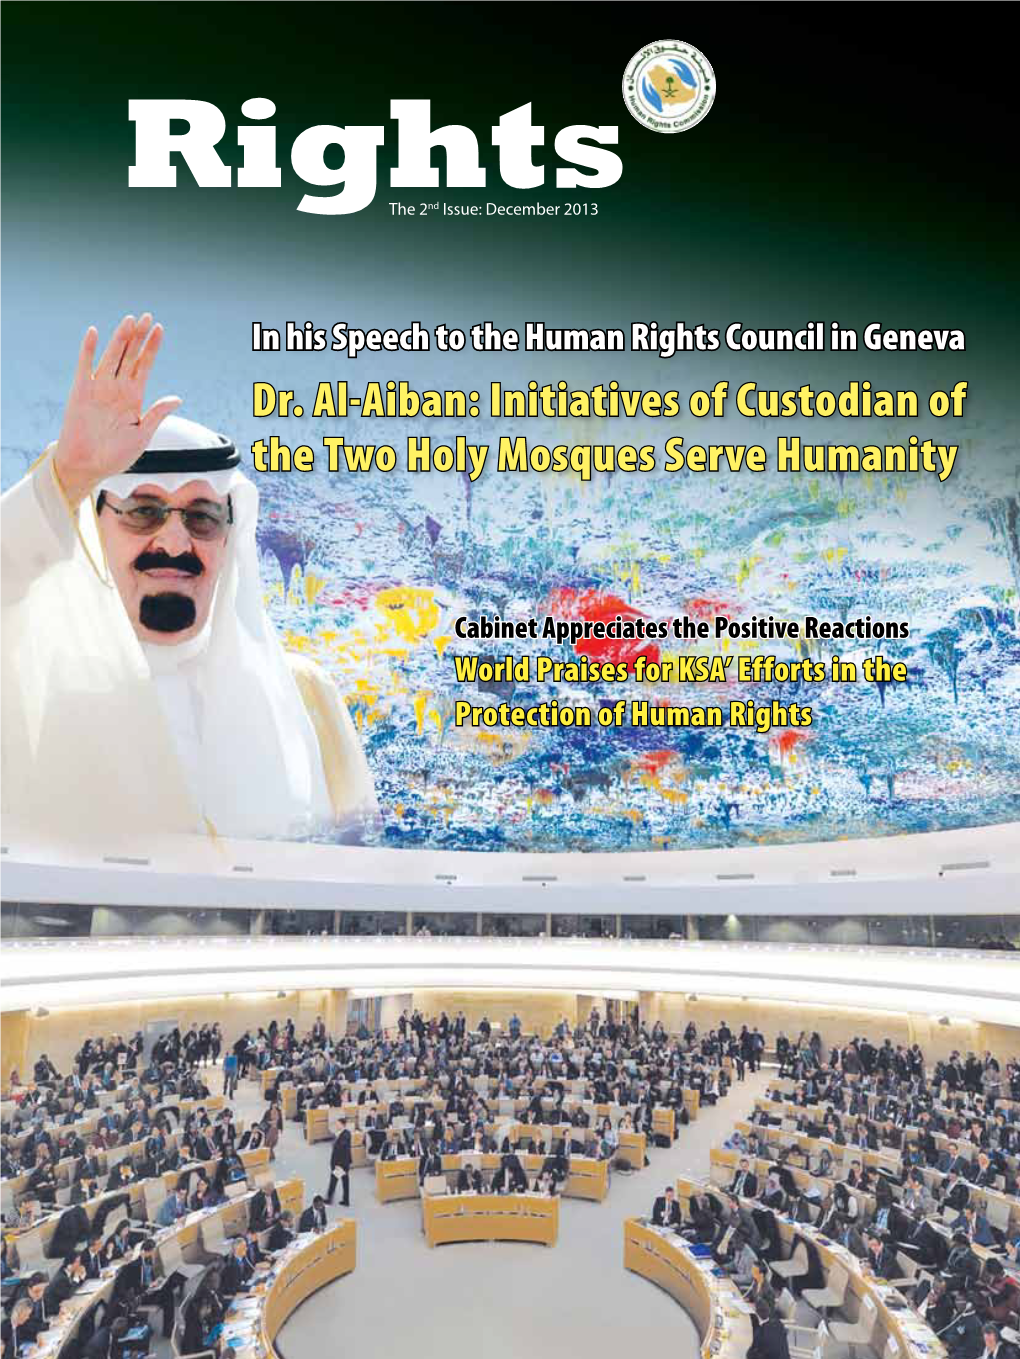 Dr. Al-Aiban: Initiatives of Custodian of the Two Holy Mosques Serve Humanity